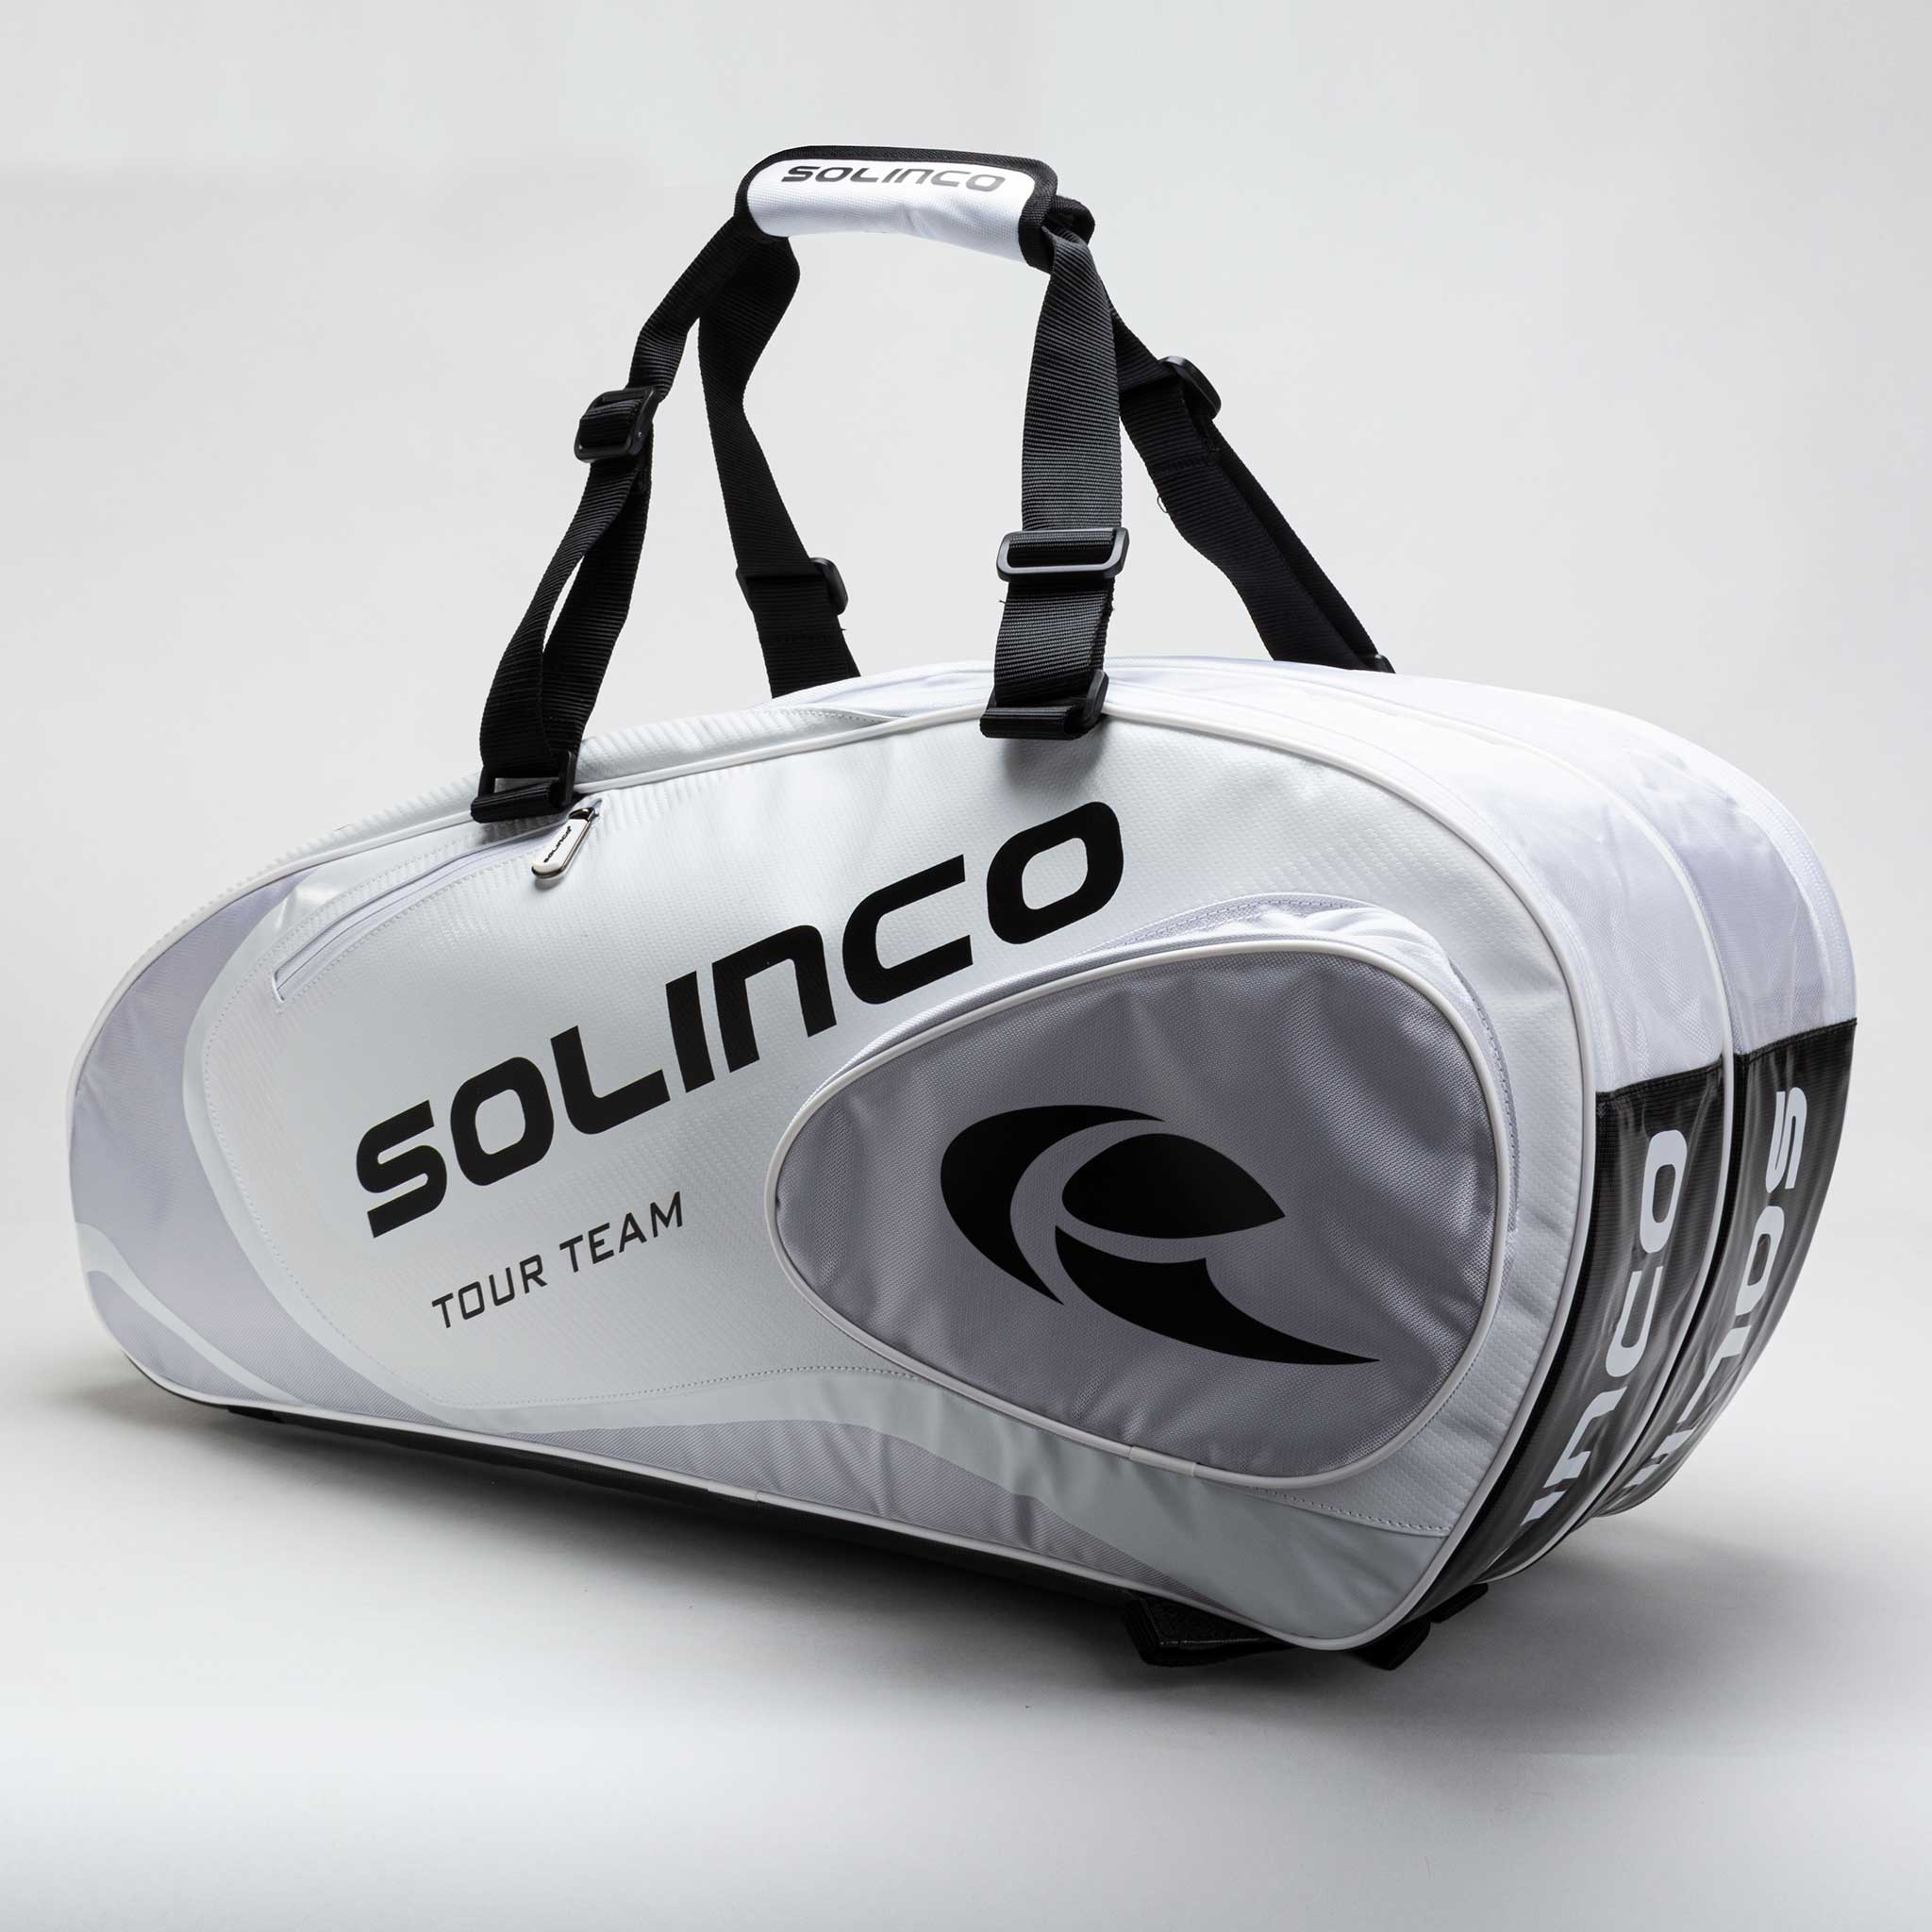 Solinco Whiteout 6 Pack Bag